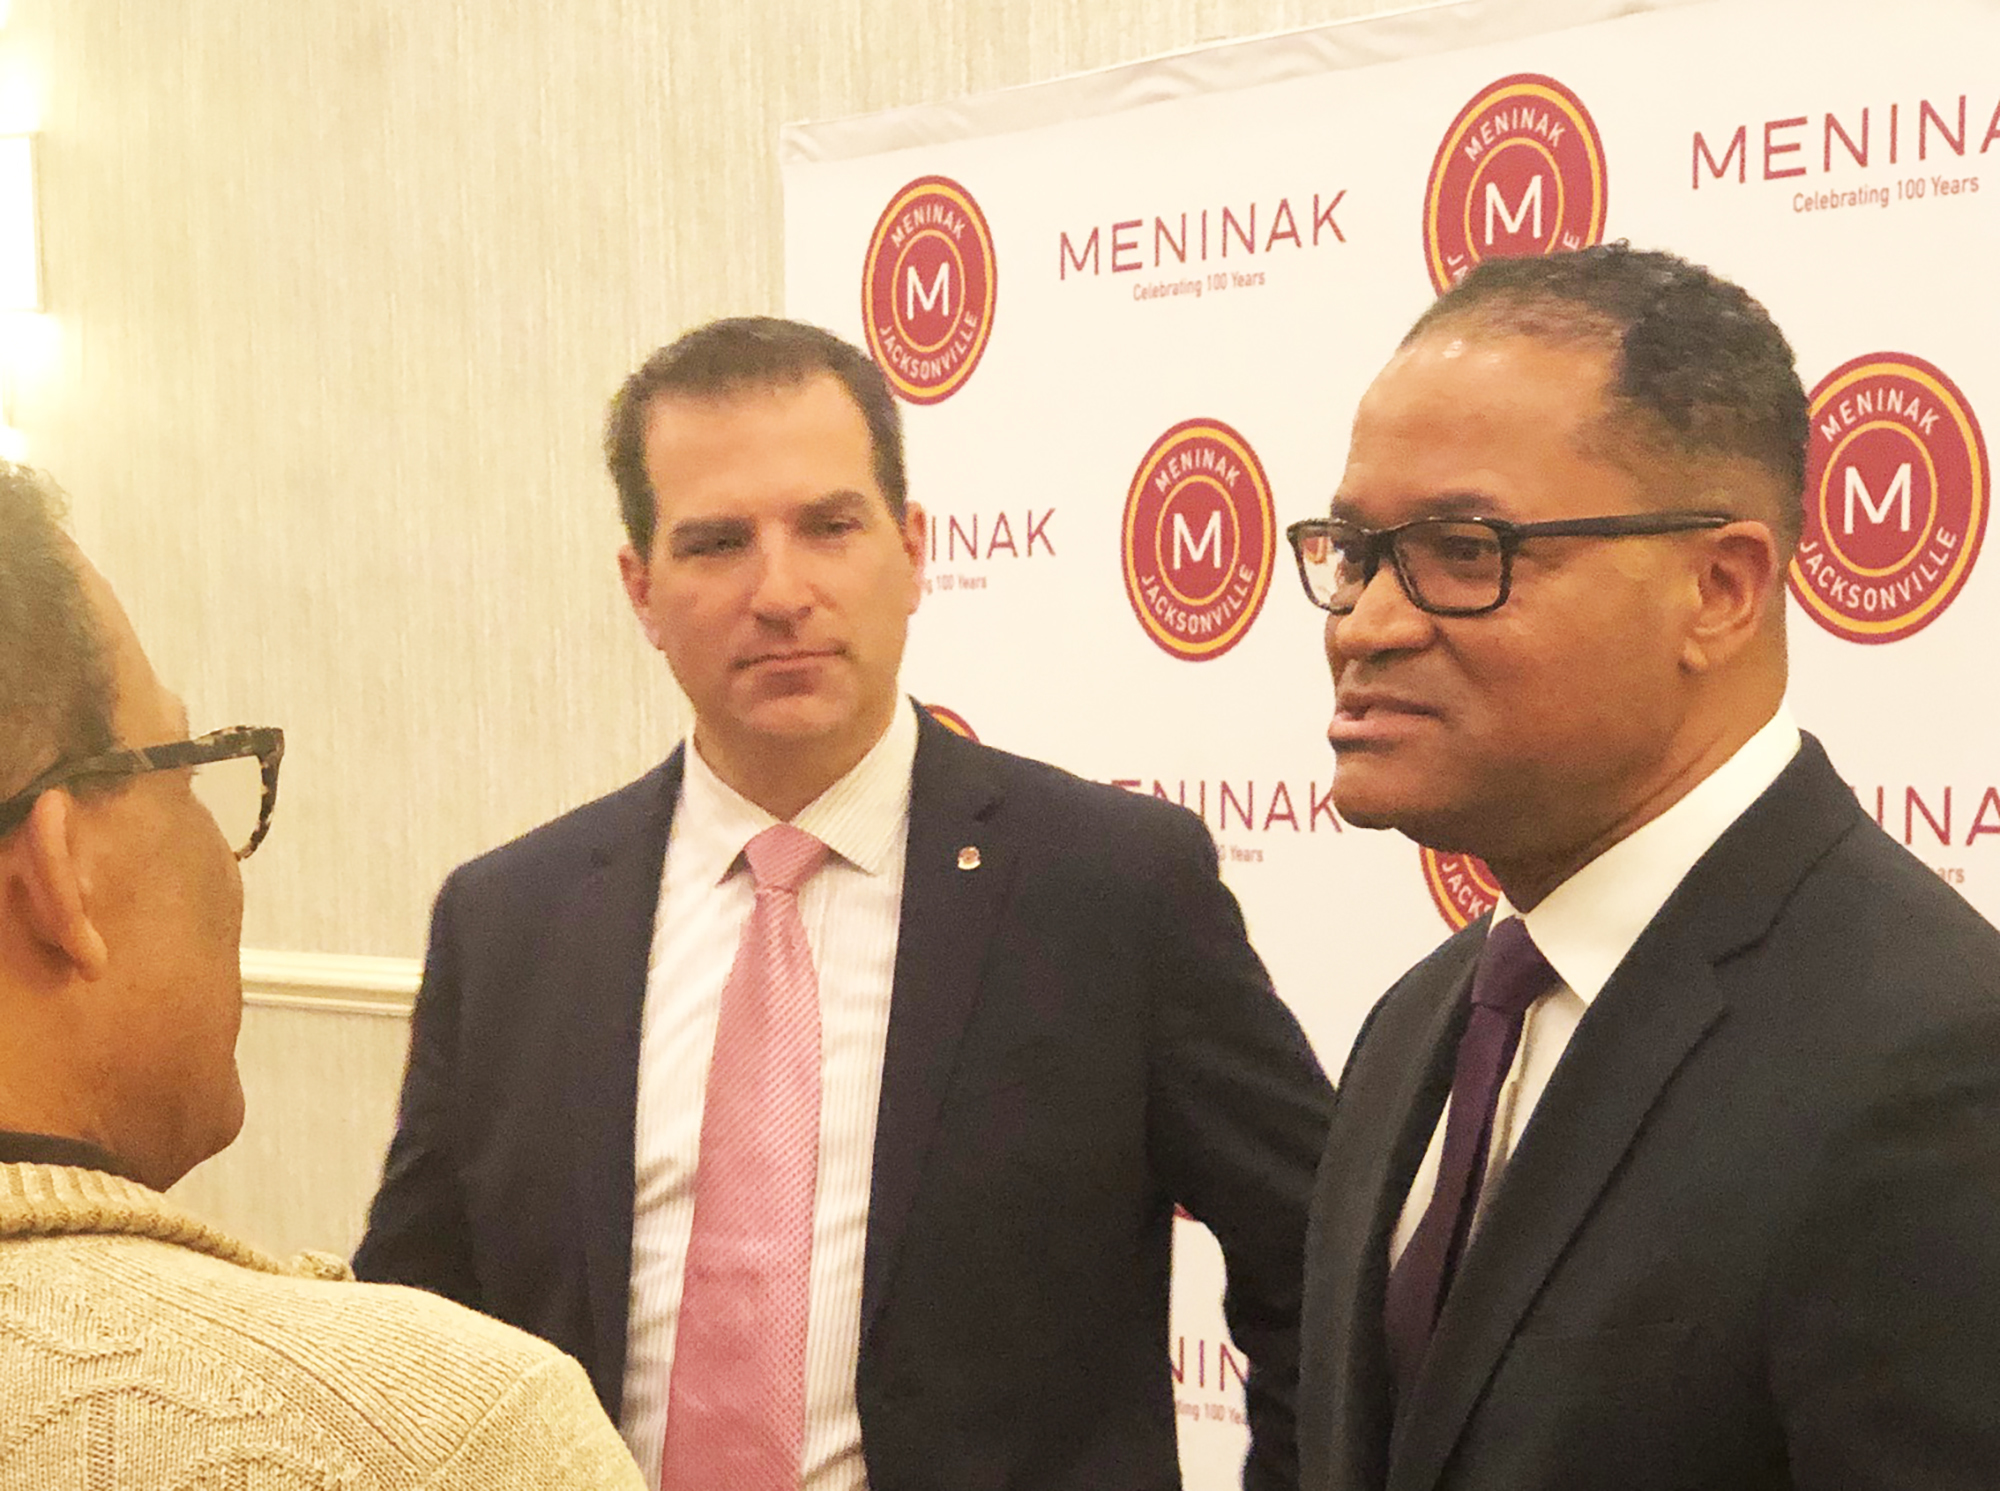 The Cordish Companies COO Zed Smith, right, after speaking to the Meninak Club of Jacksonville. At center is club President Wes Benwick.